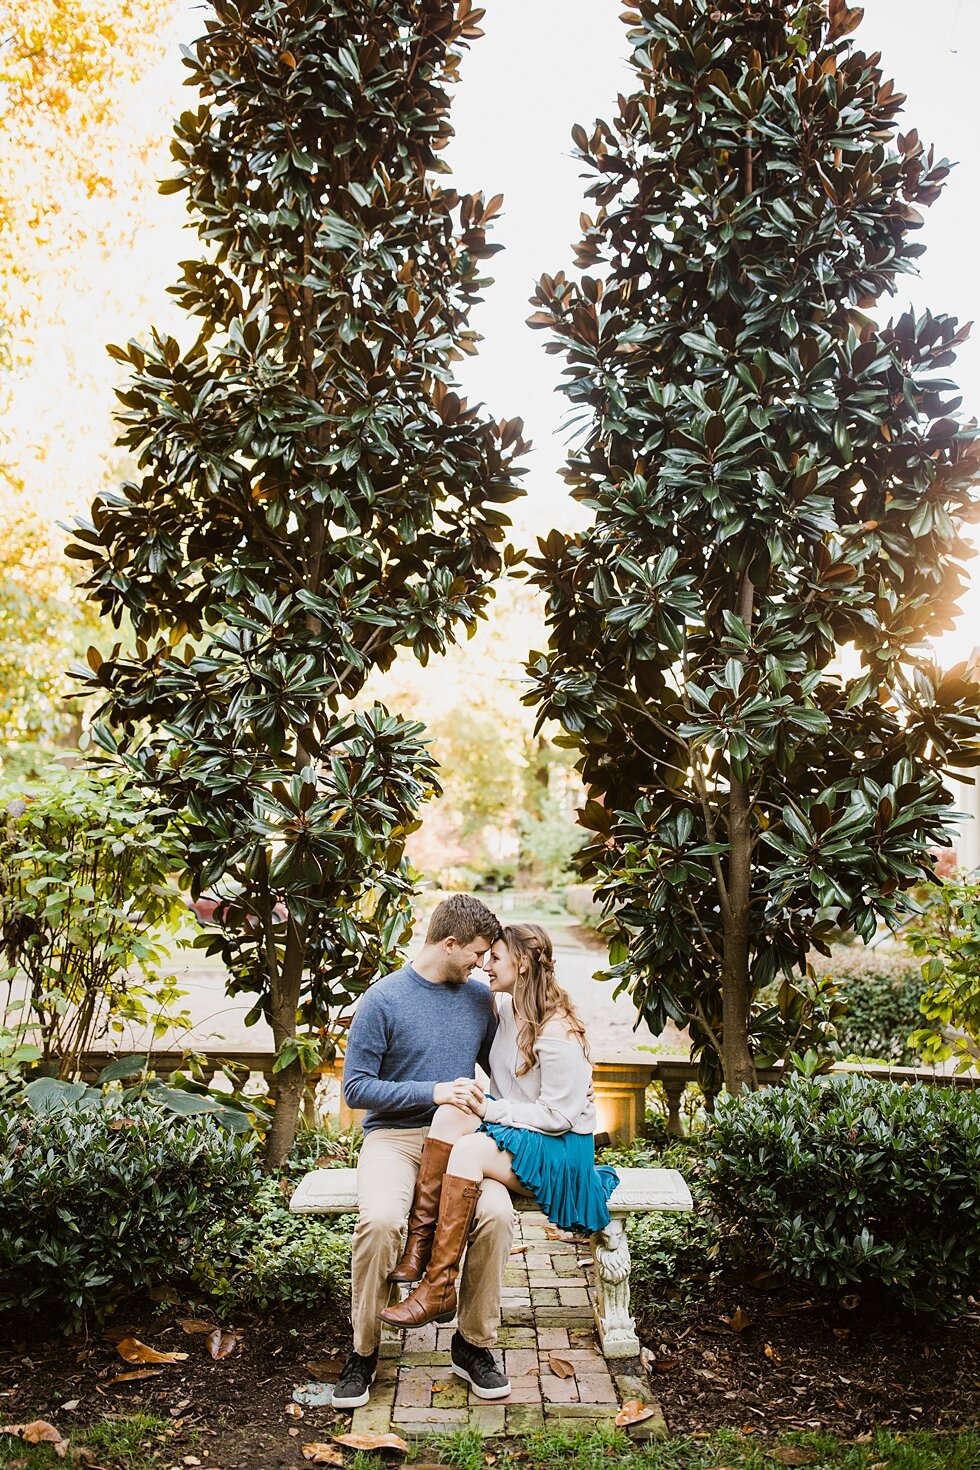  Romantic gazebo engagement session capturing the proposal on the night of their anniversary in St James. Louisville photographer engagements urban roof top anniversary romantic kentucky candles love #engagementphotos #savethedatephotos #savethedates